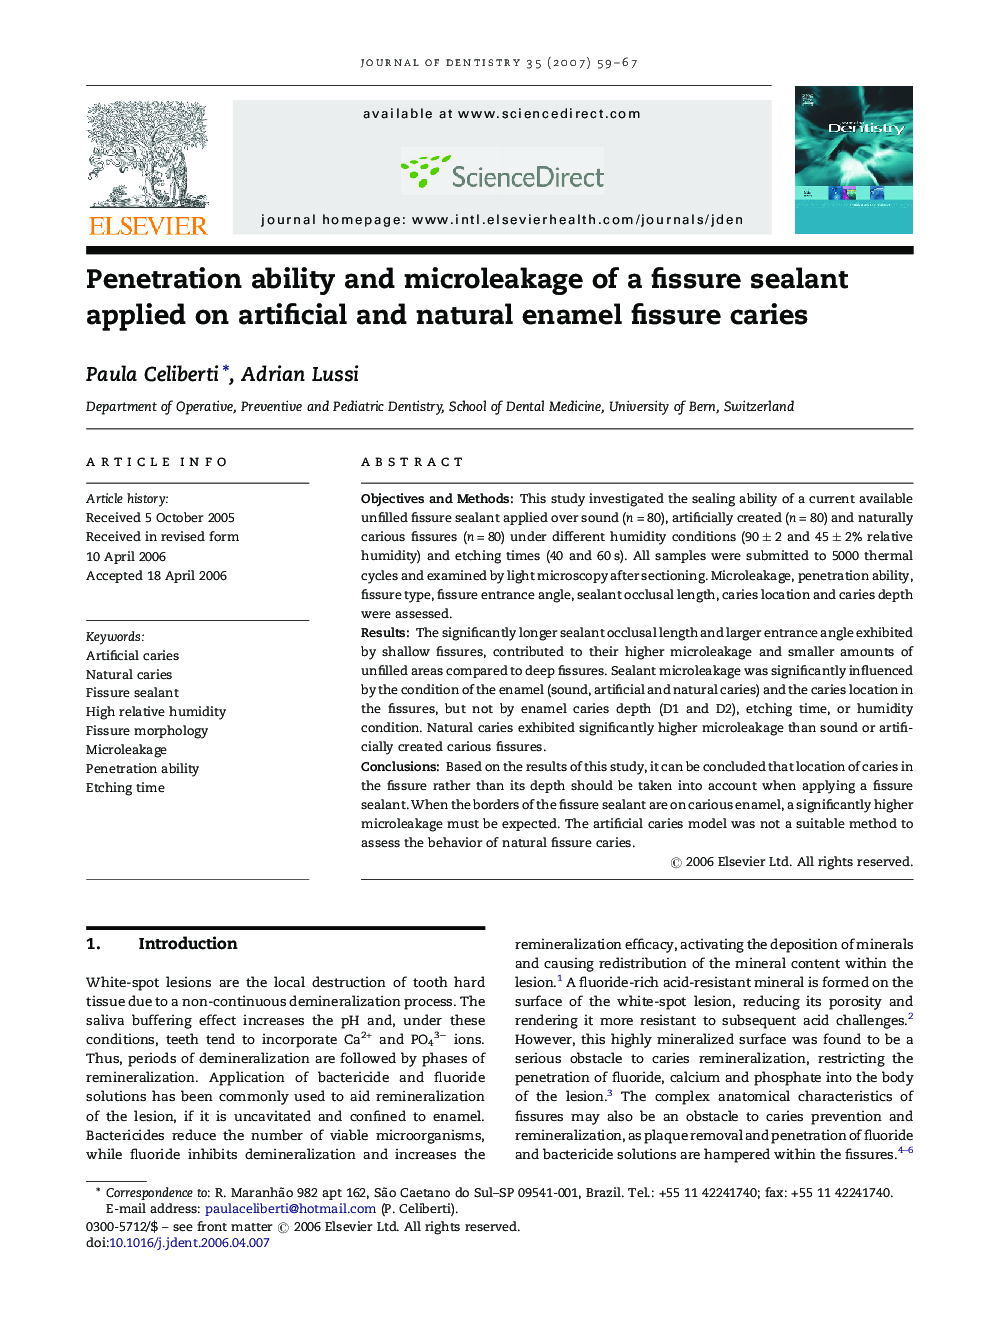 Penetration ability and microleakage of a fissure sealant applied on artificial and natural enamel fissure caries